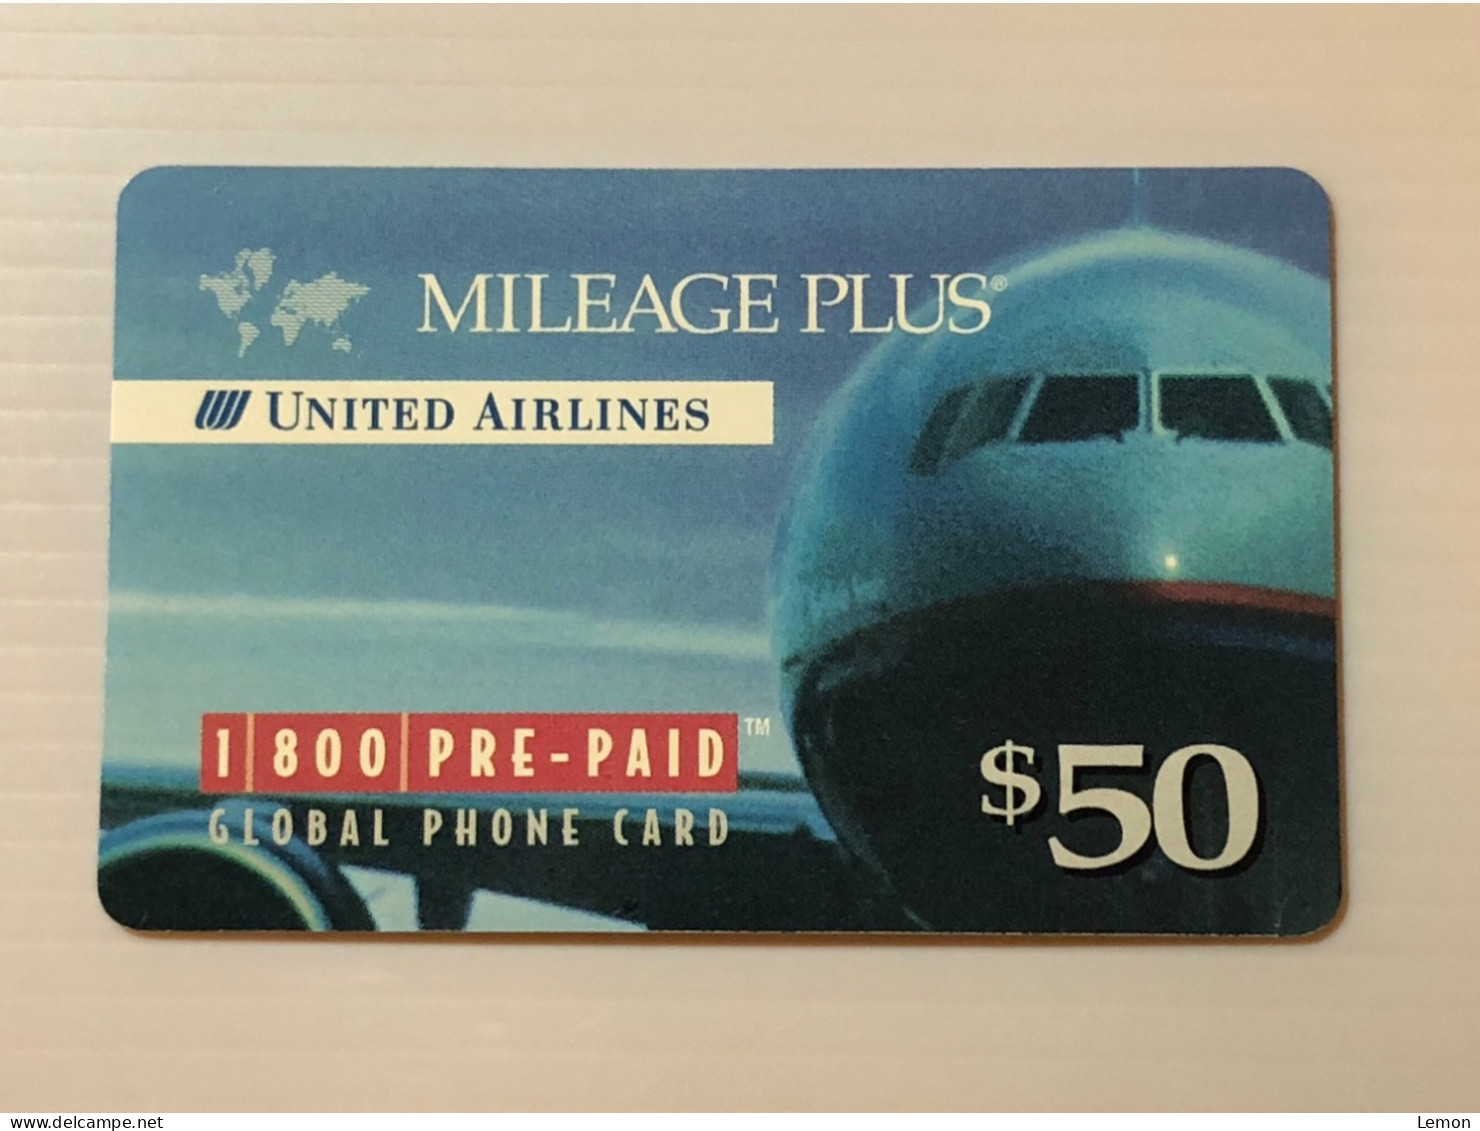 Mint USA UNITED STATES America Prepaid Telecard Phonecard, United Airlines Mileage Plus $50 PhoneCard,Set Of 1 Mint Card - Collections